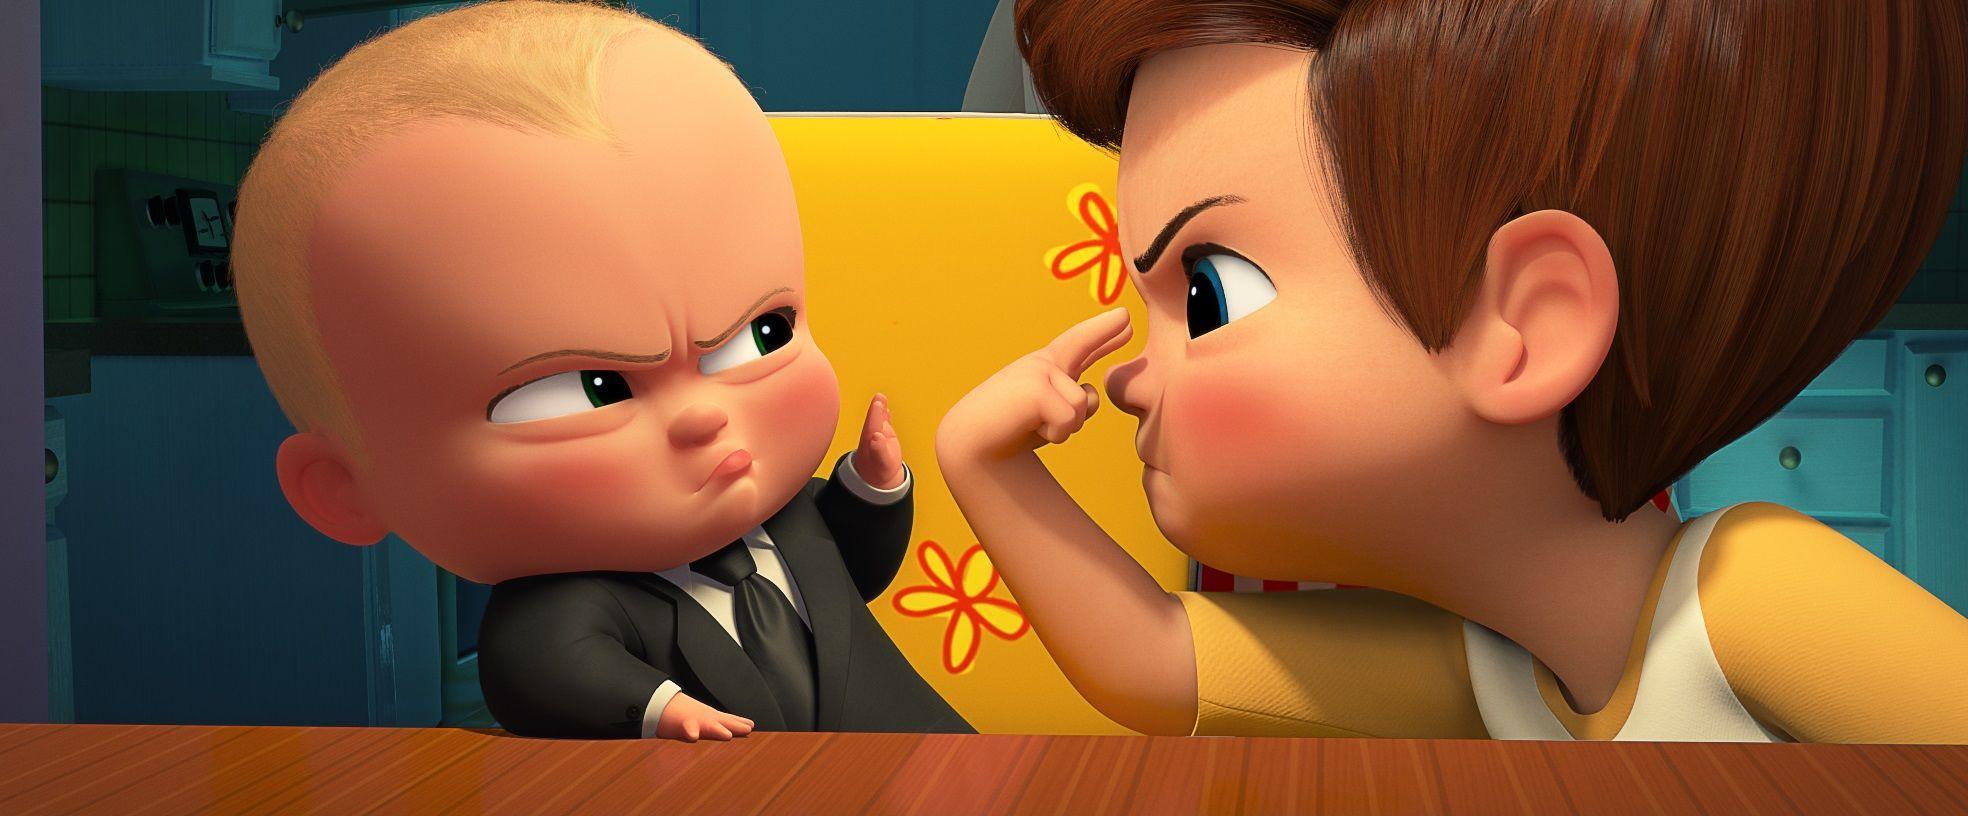 Dreamworks Animation's “The Boss Baby” celebrates siblings' love